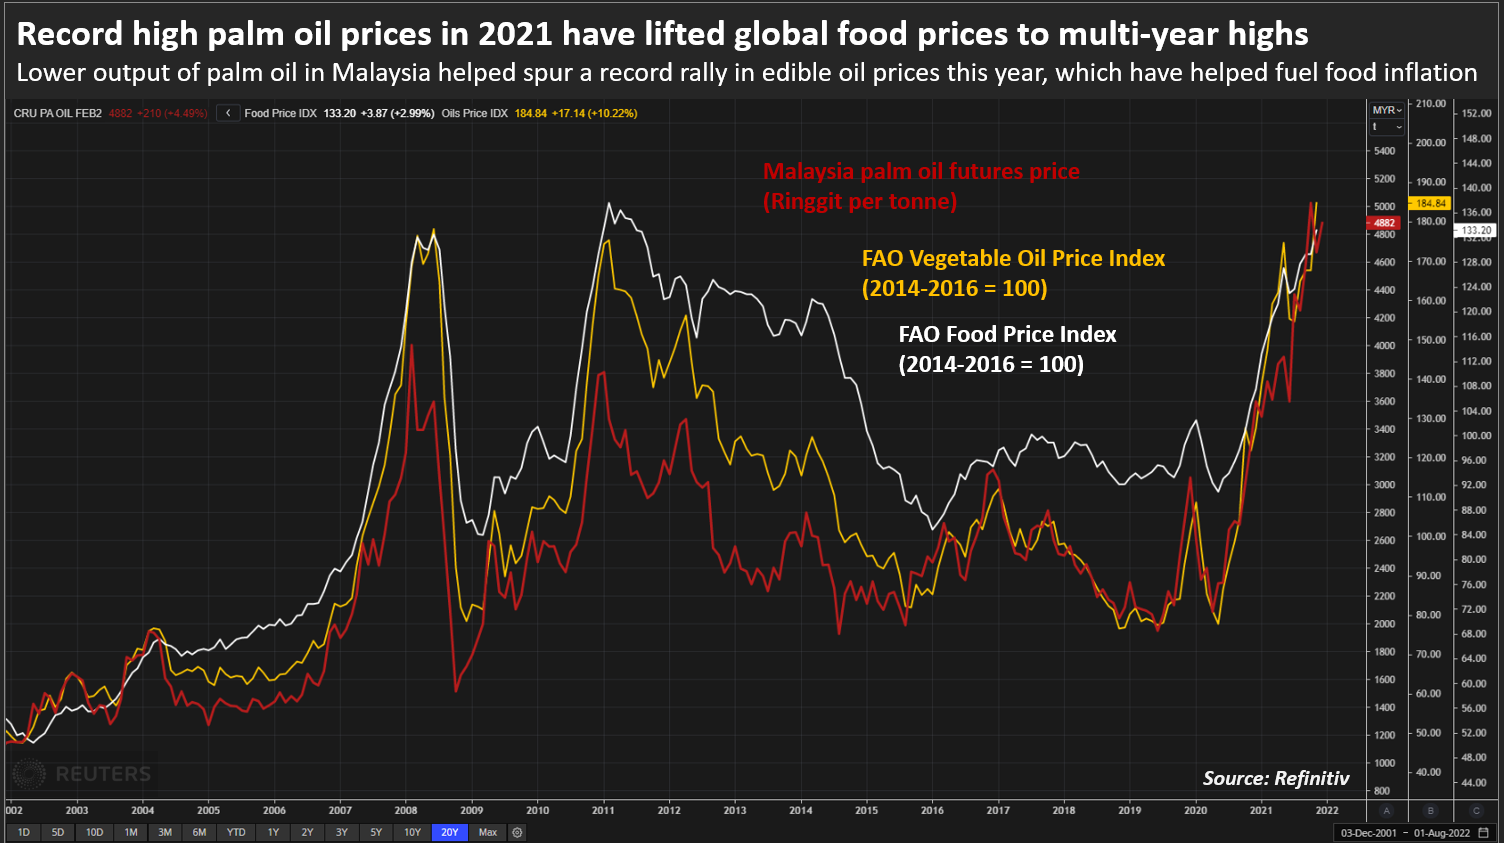 Record high palm oil prices in 2021 have lifted global food prices to multi-year highs